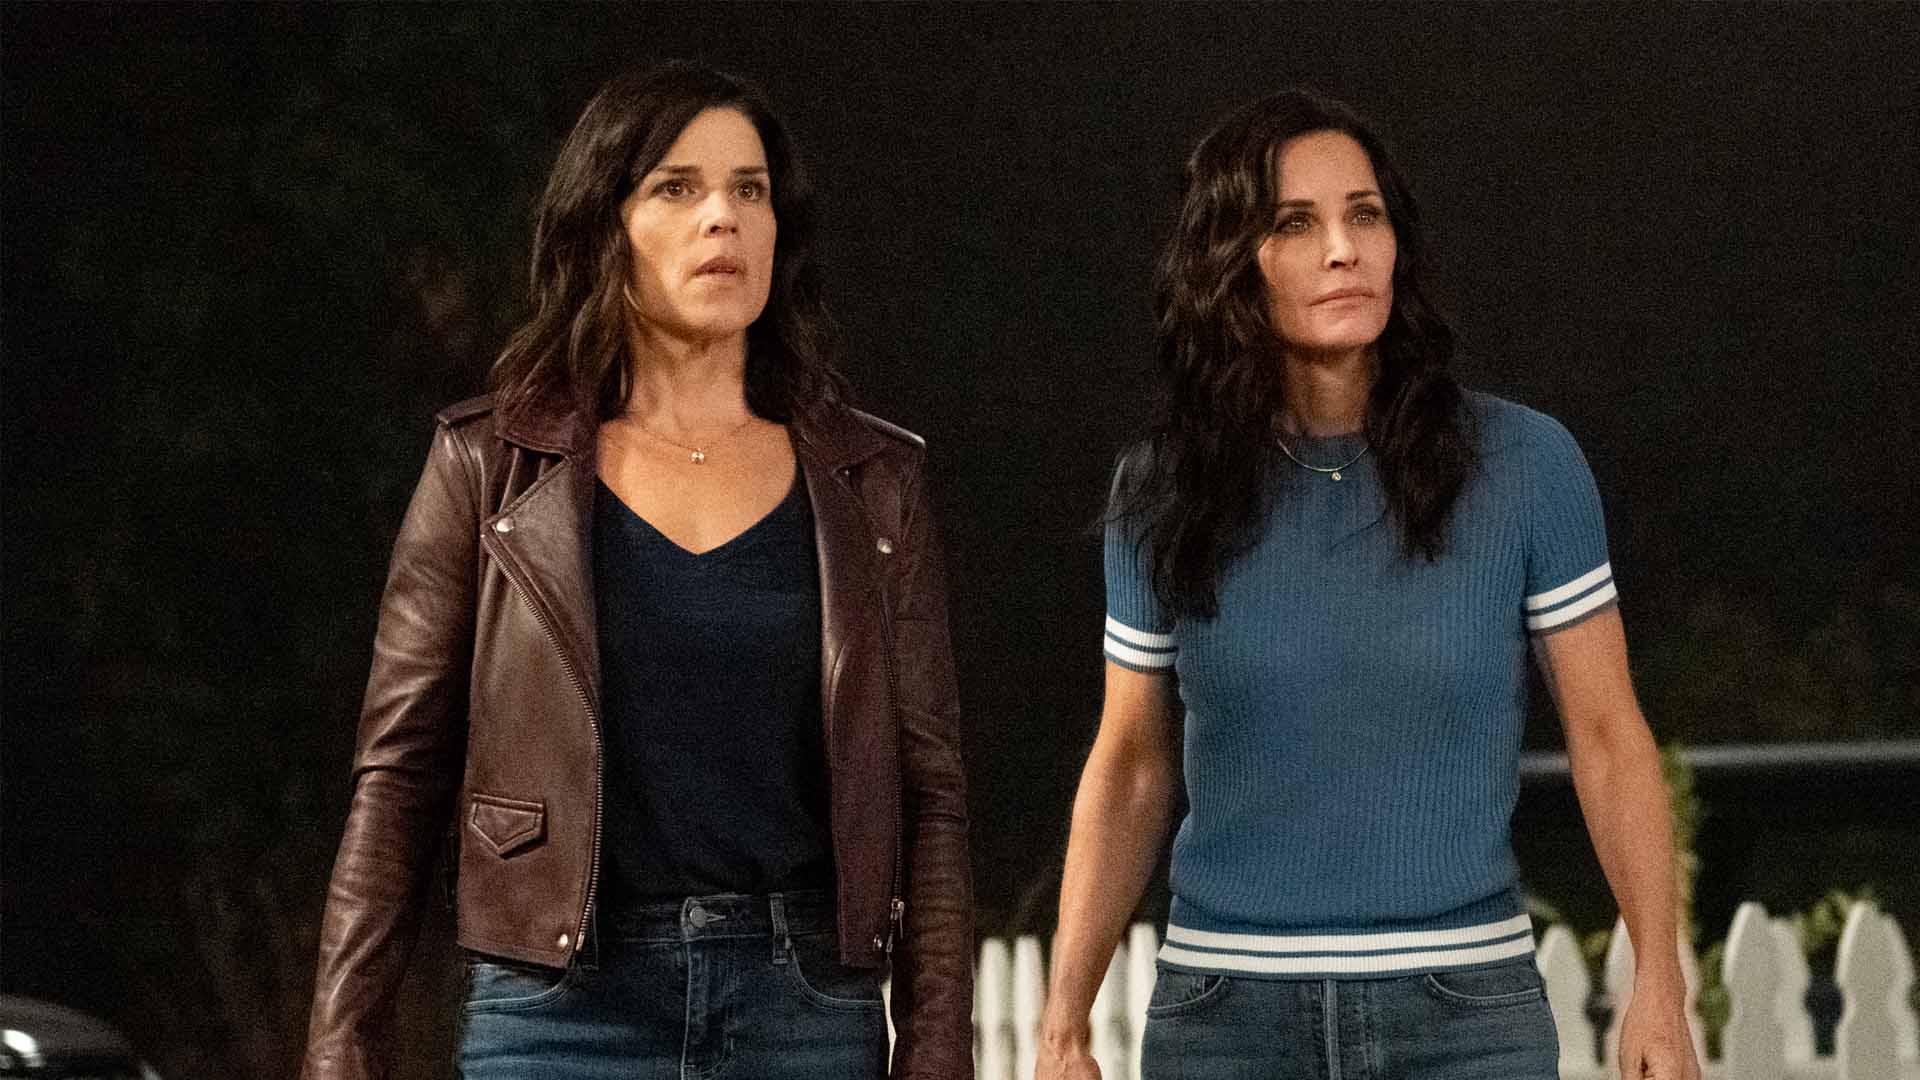 Trailer Watch: Neve Campbell, Courteney Cox, David Arquette Return For More Slasher Action In The New Scream